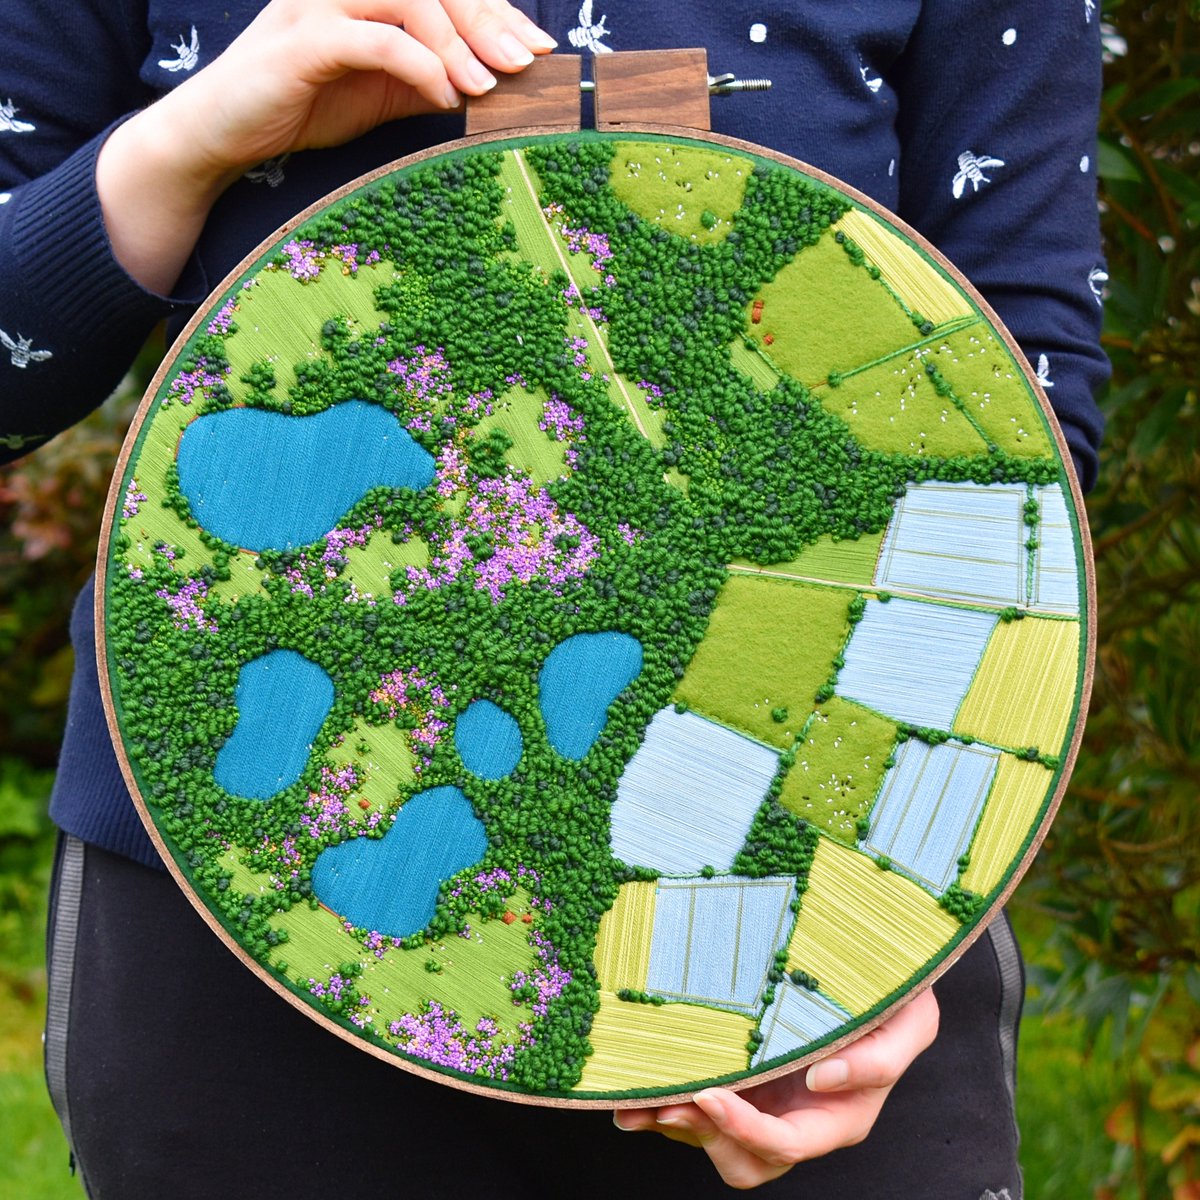 'Its good for the soul (and soothing for the mind)' - a 14-inch aerial embroidery landscape finished last week. Soothing blues, greens and purples in the fields, moorland heather and lakes 💚 and finished with a little country road! #Neurodivergent #ActuallyAutistic #art #artist